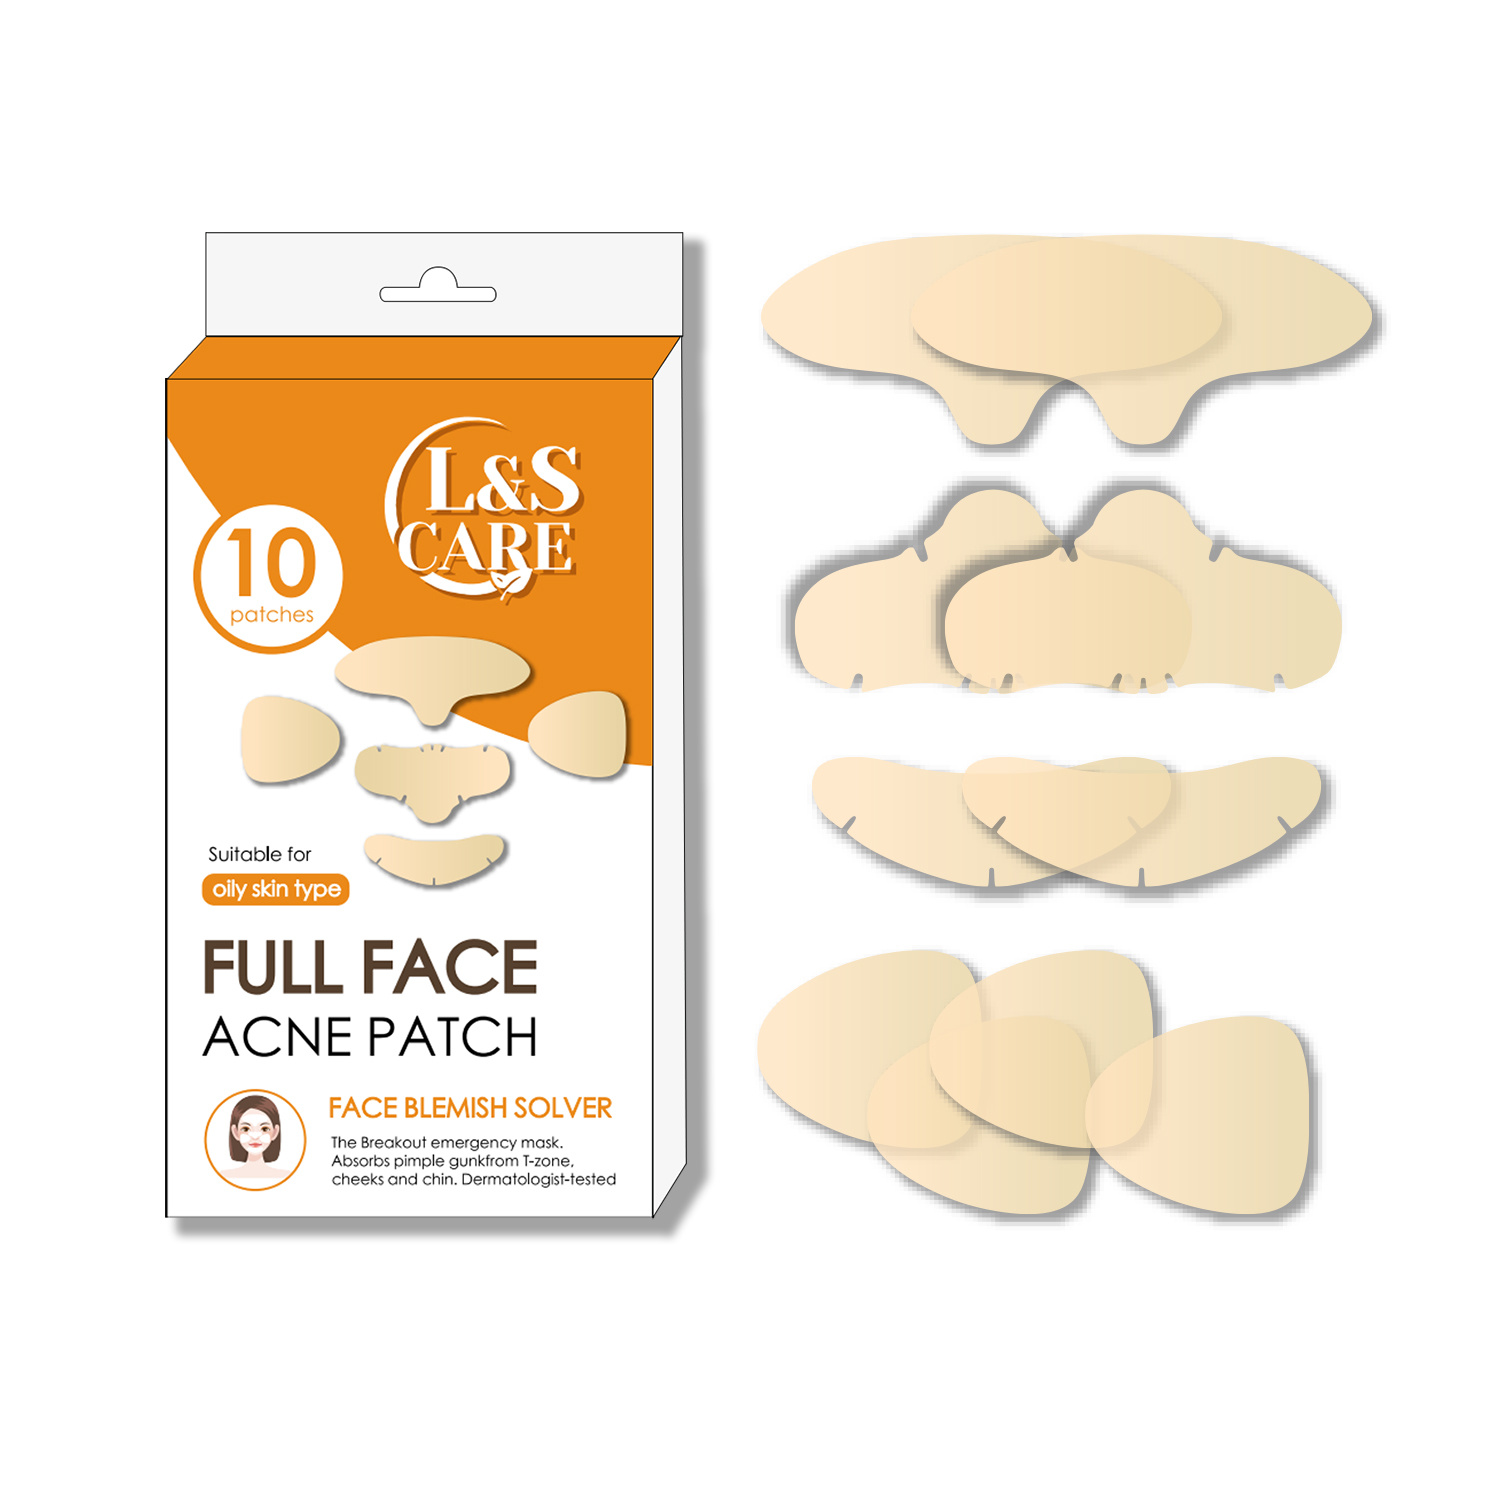 Full face acne pimple patch